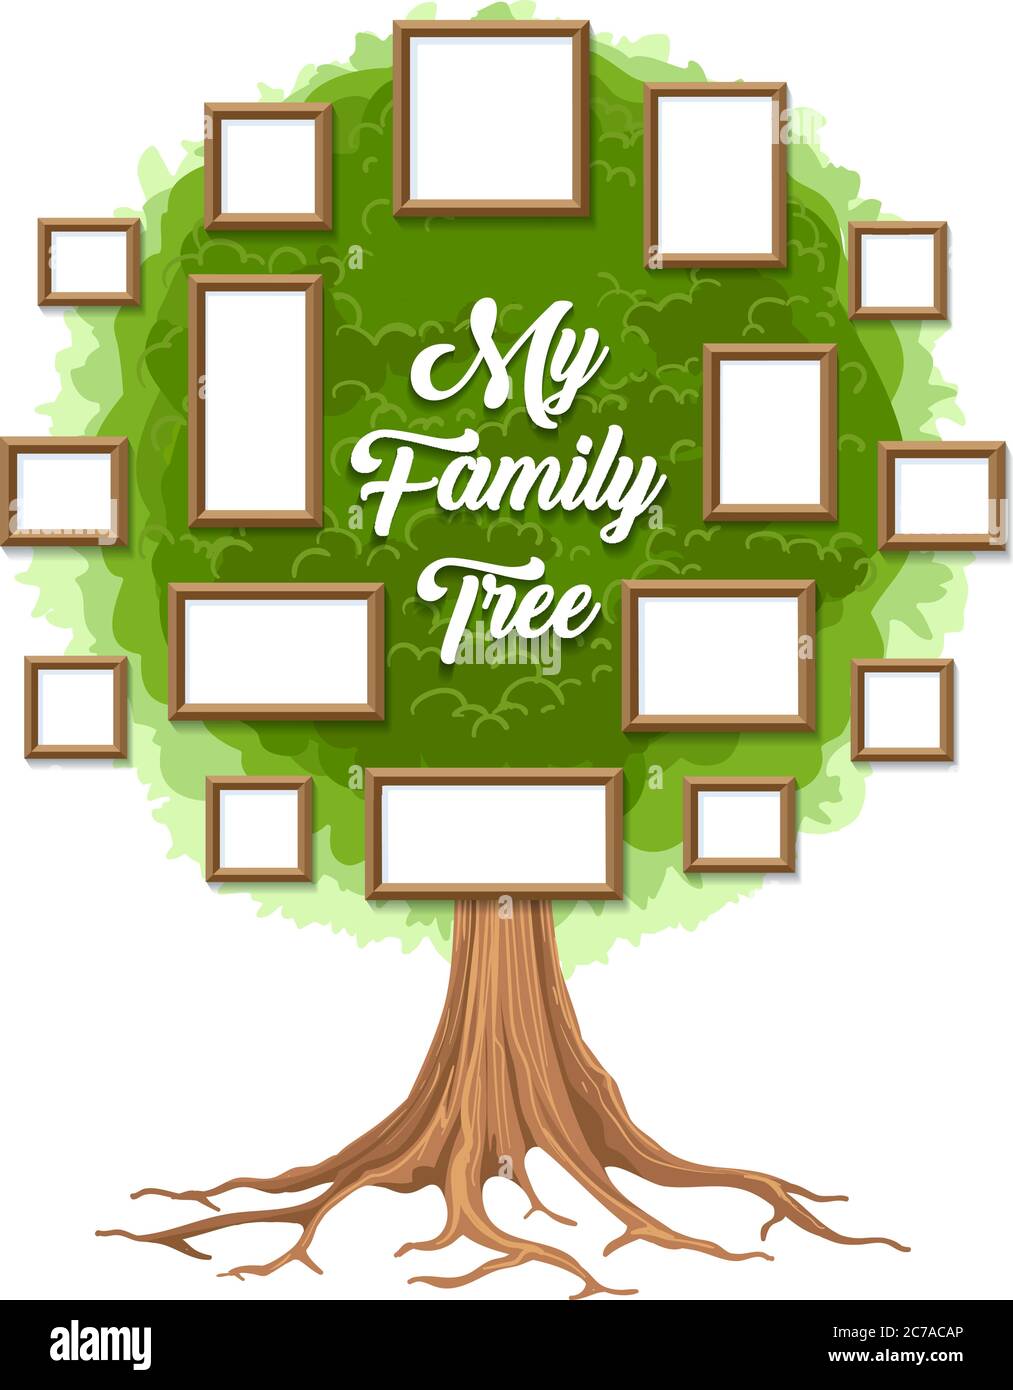 Children's Family Tree Template from c8.alamy.com